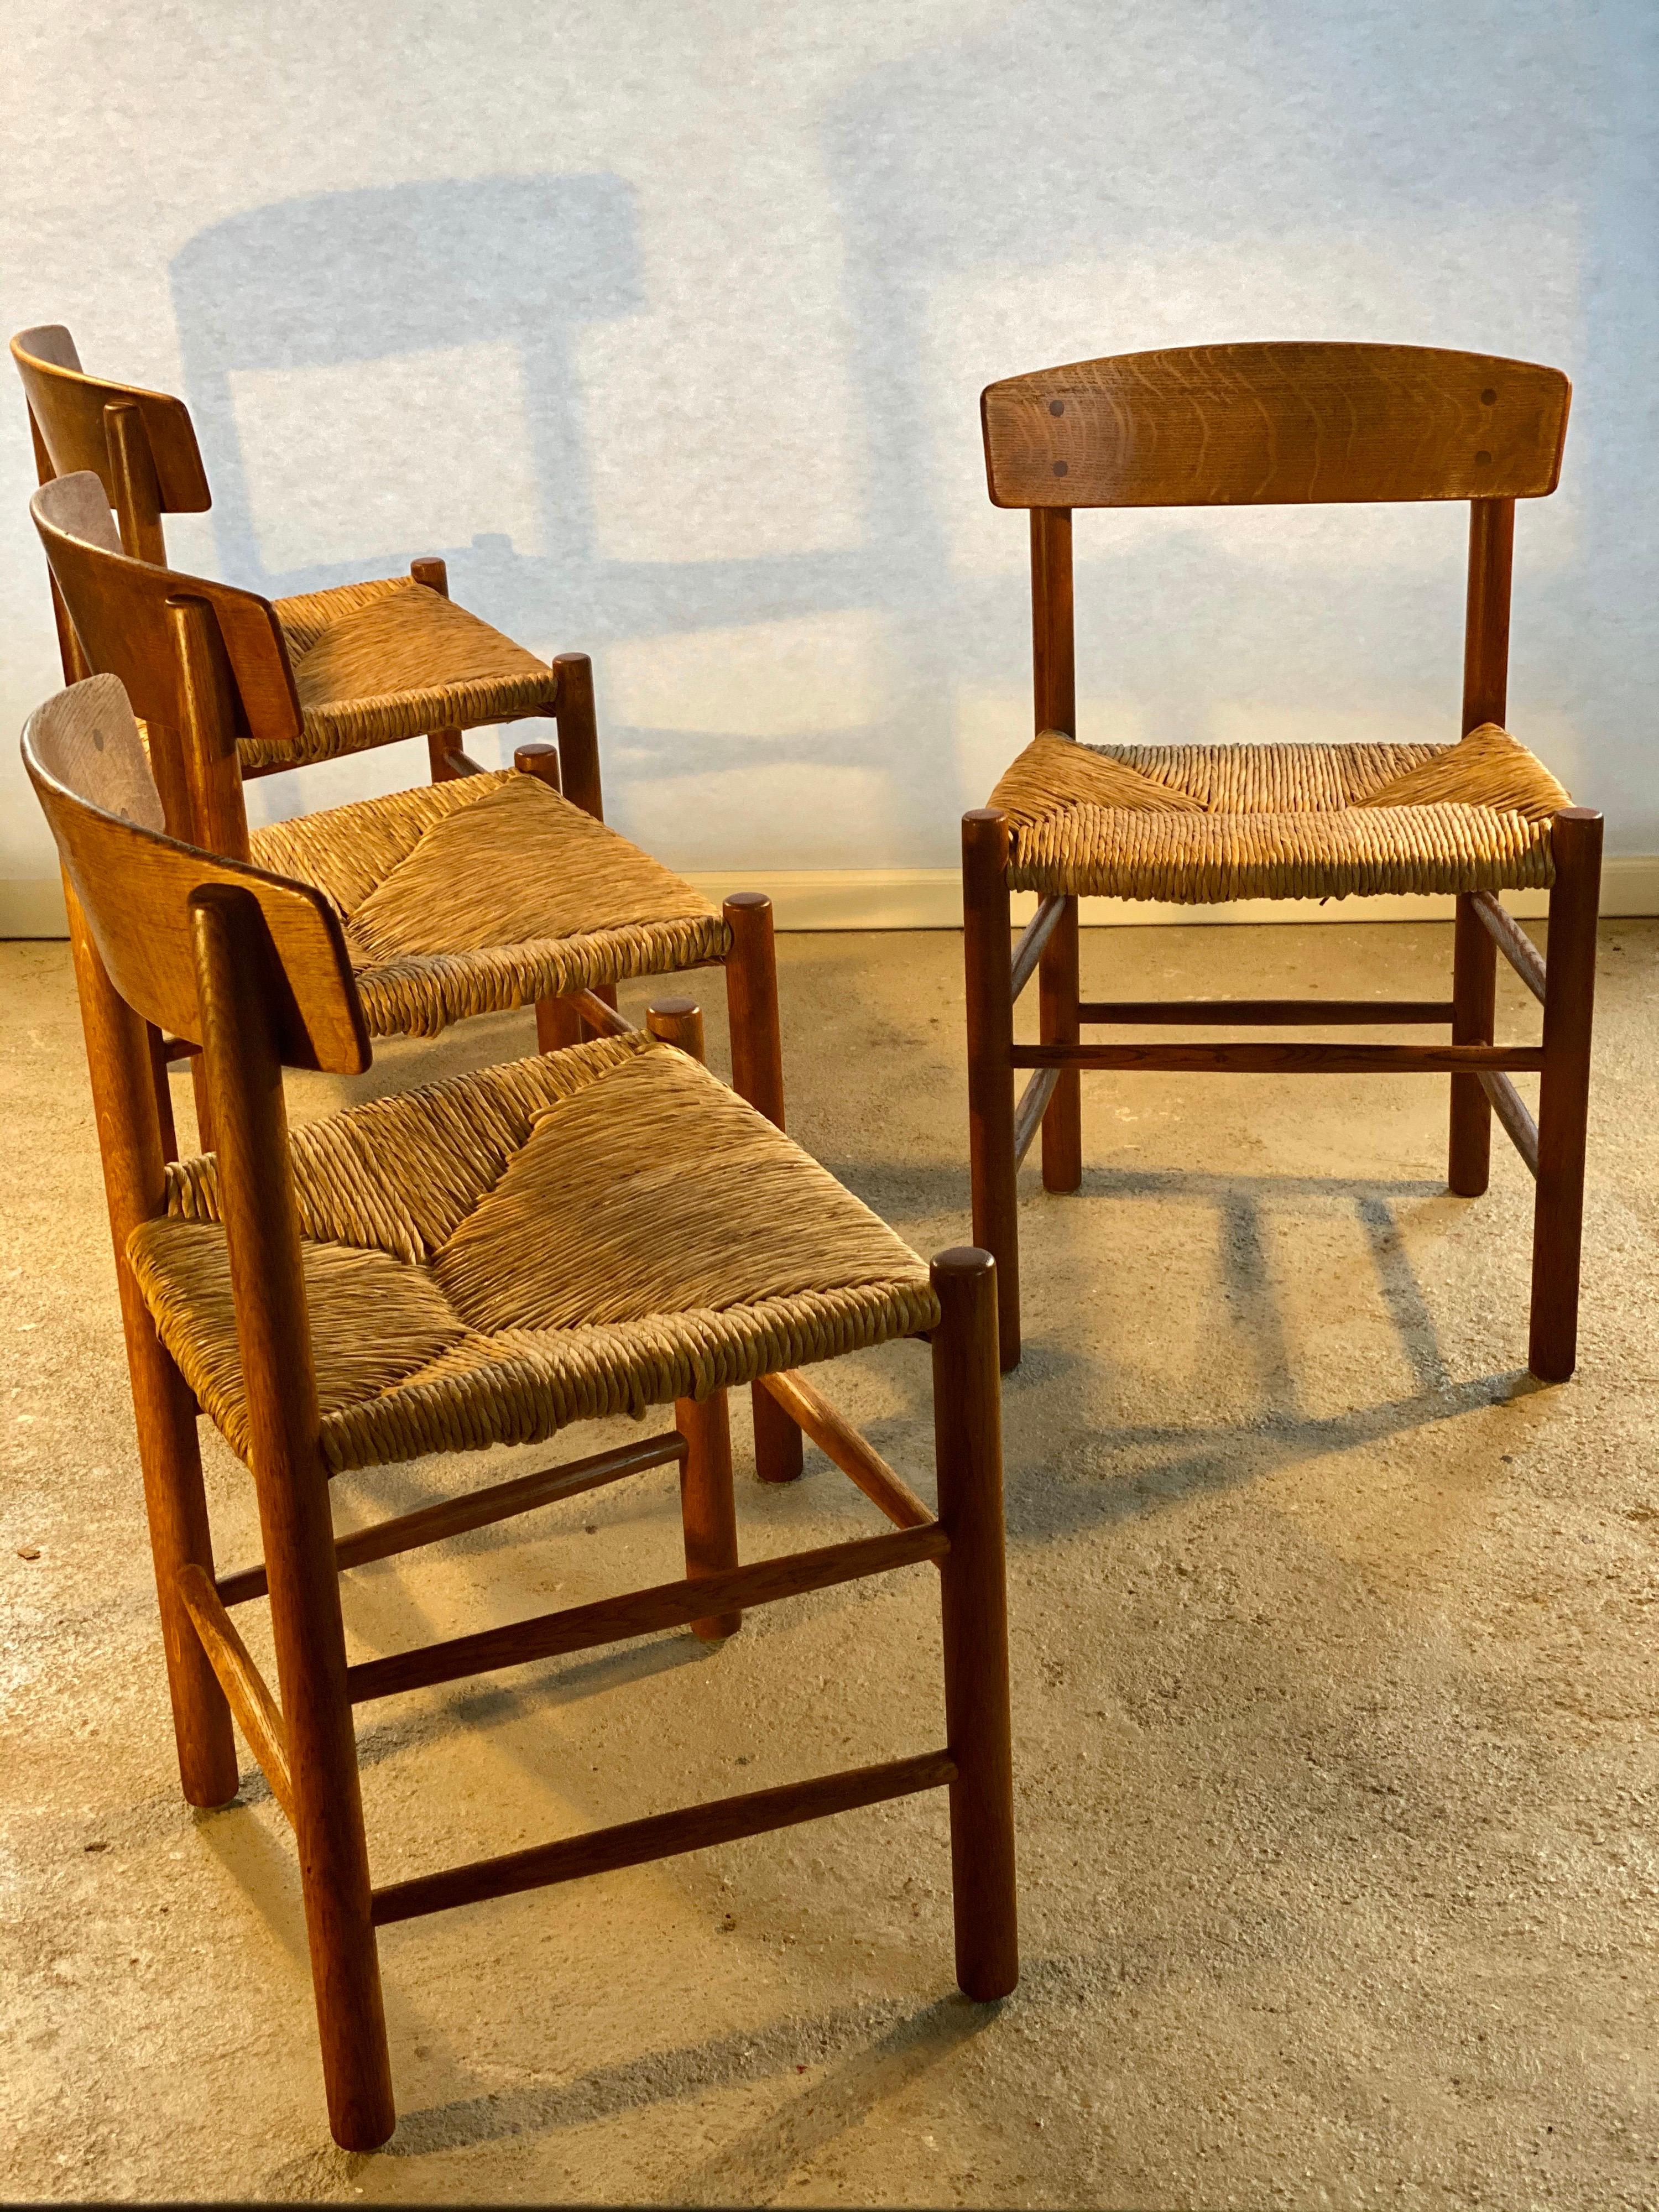 A set of all-time Classic midcentury design dining room chairs model J39 by Danish designer Børge Møgensen. These chairs are from the very rare, very first 1947 edition manufactured by Federicia, in solid oak and with the original rush seat (so no